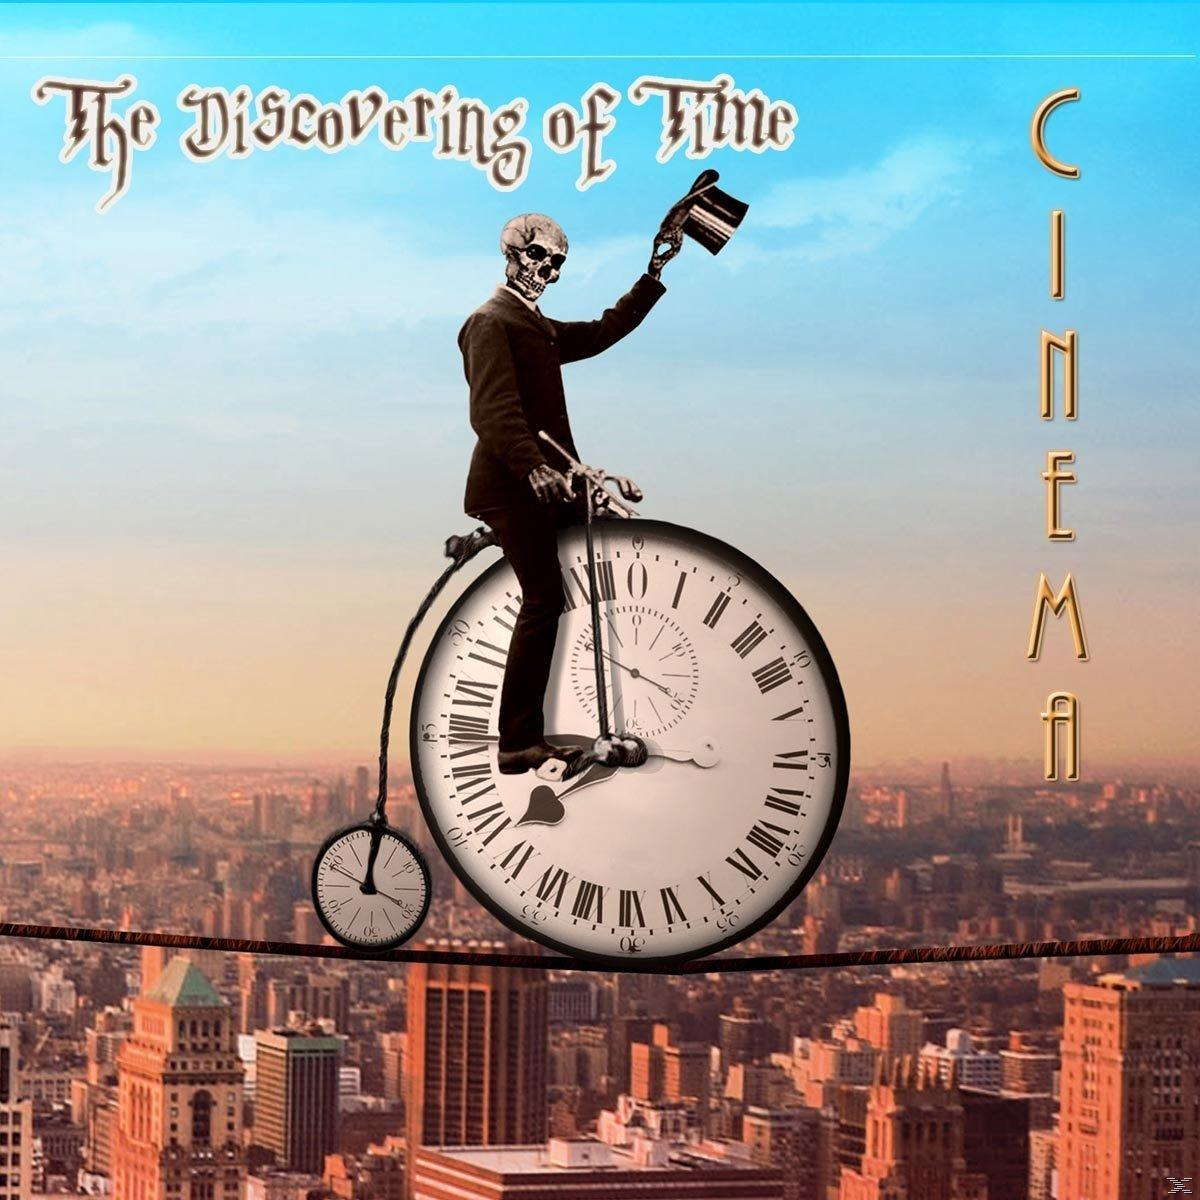 Cinema - The Discovering (CD) Of - Time